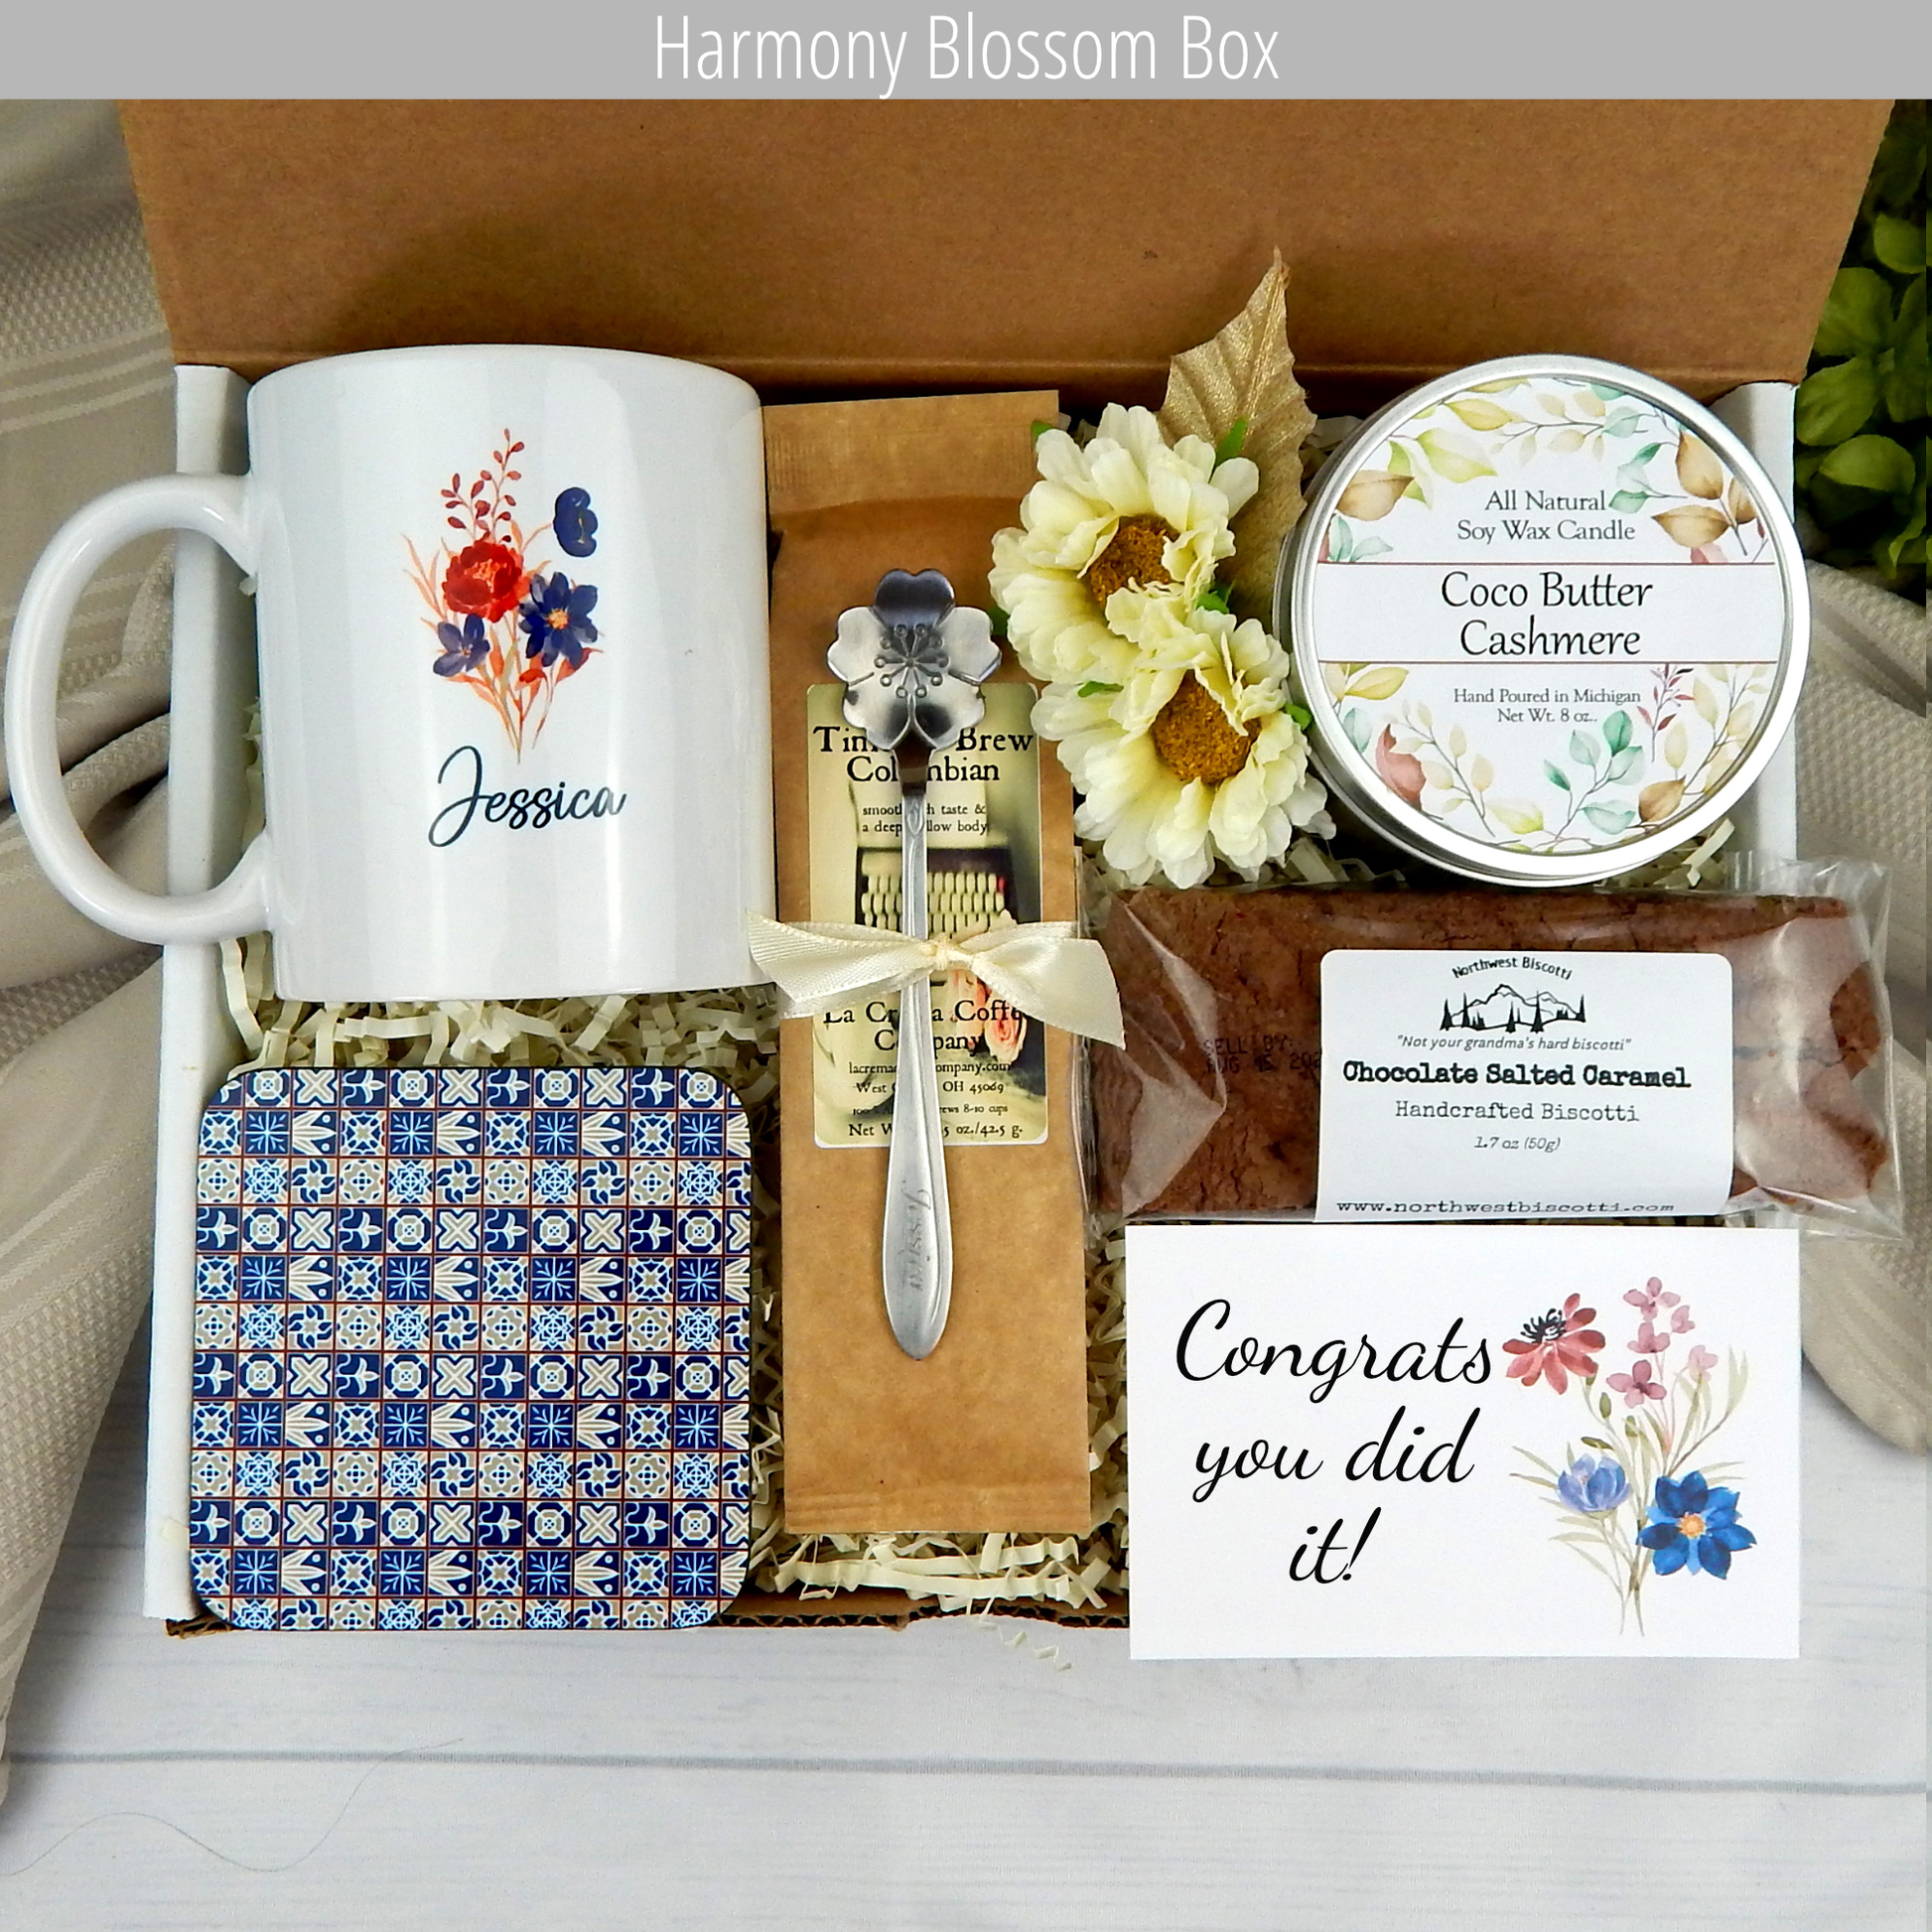 Marking milestones: Personalized name mug, candle, engraved spoon, biscotti, and coffee in a congratulations gift basket.